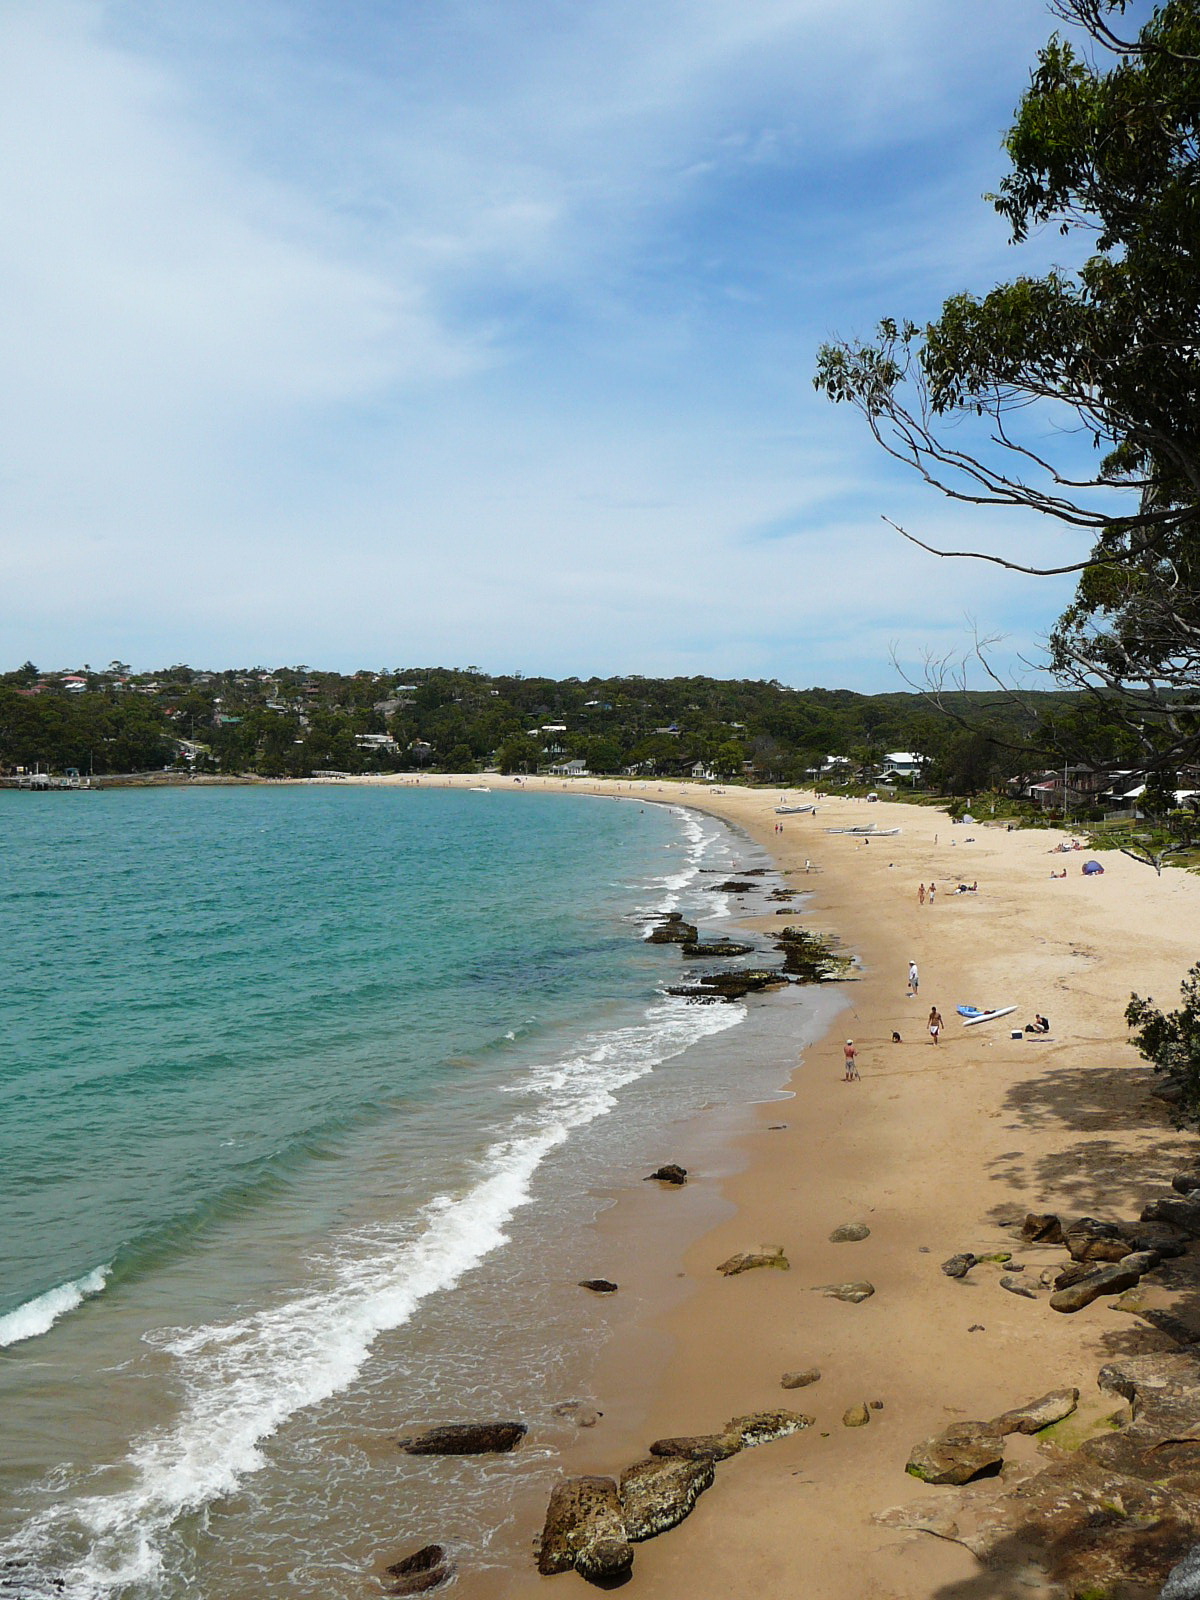 Horderns Beach from Cabbage Tree Point